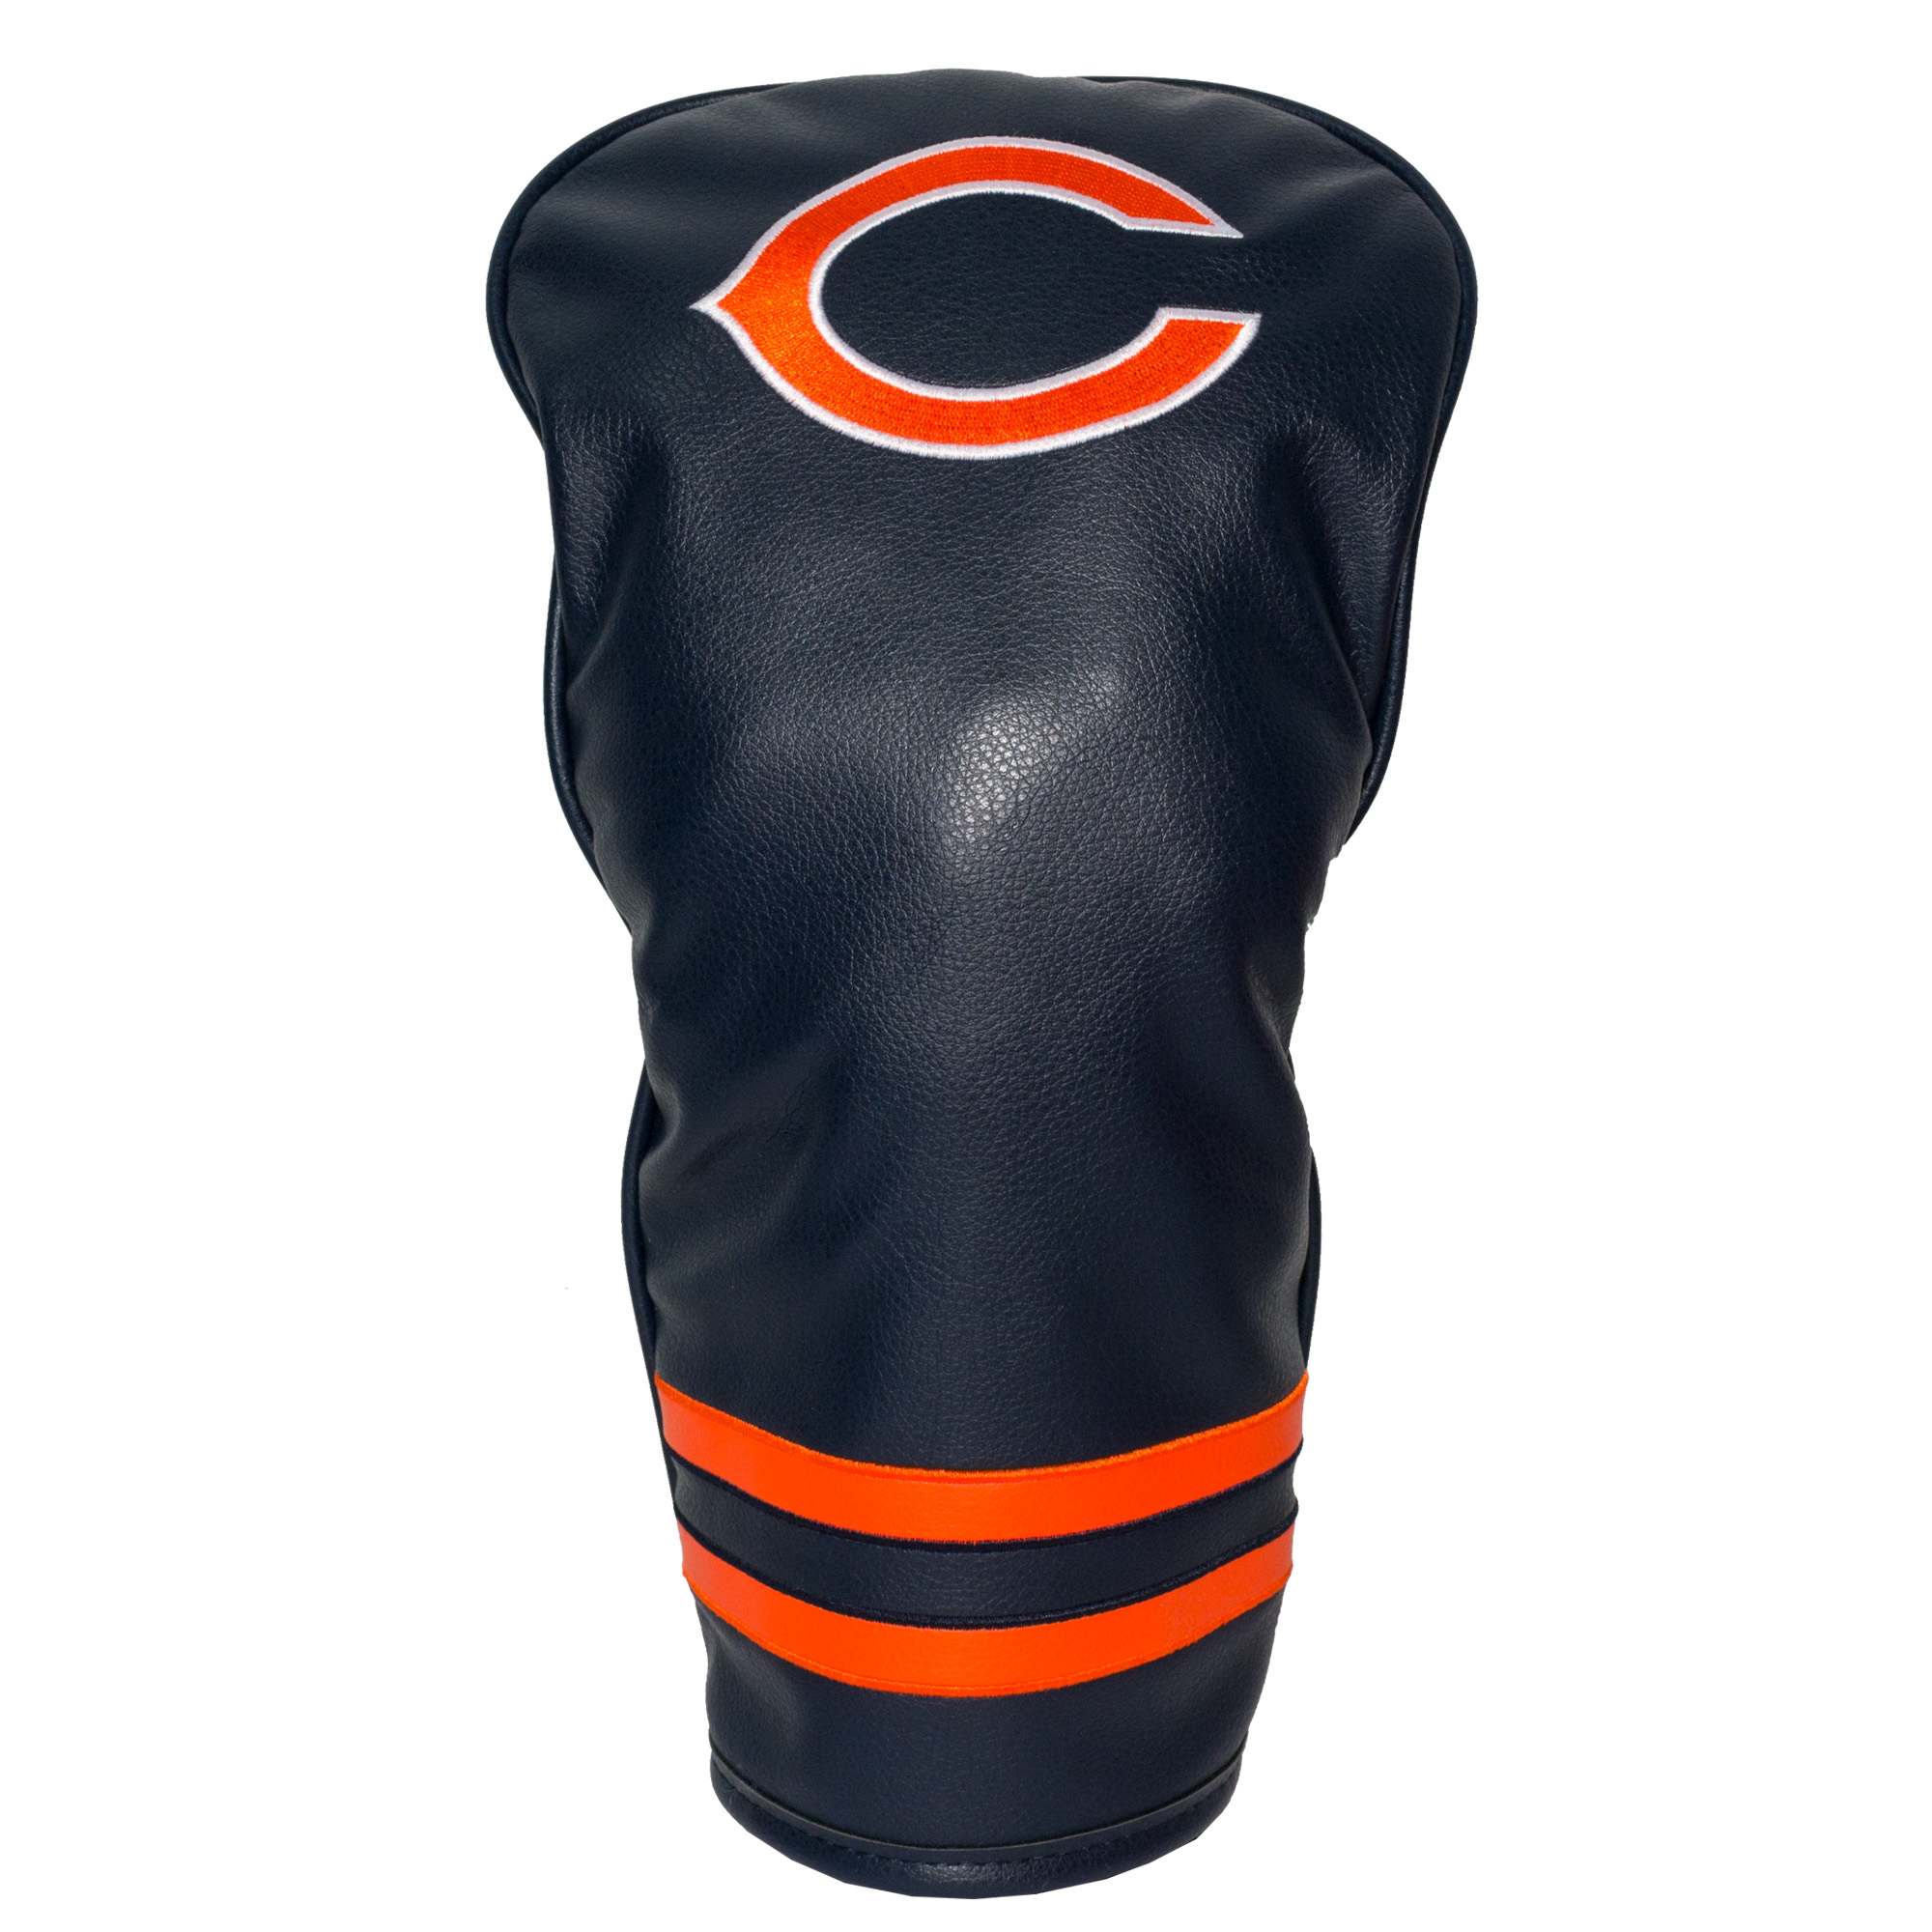 Chicago Bears Vintage Driver Headcover